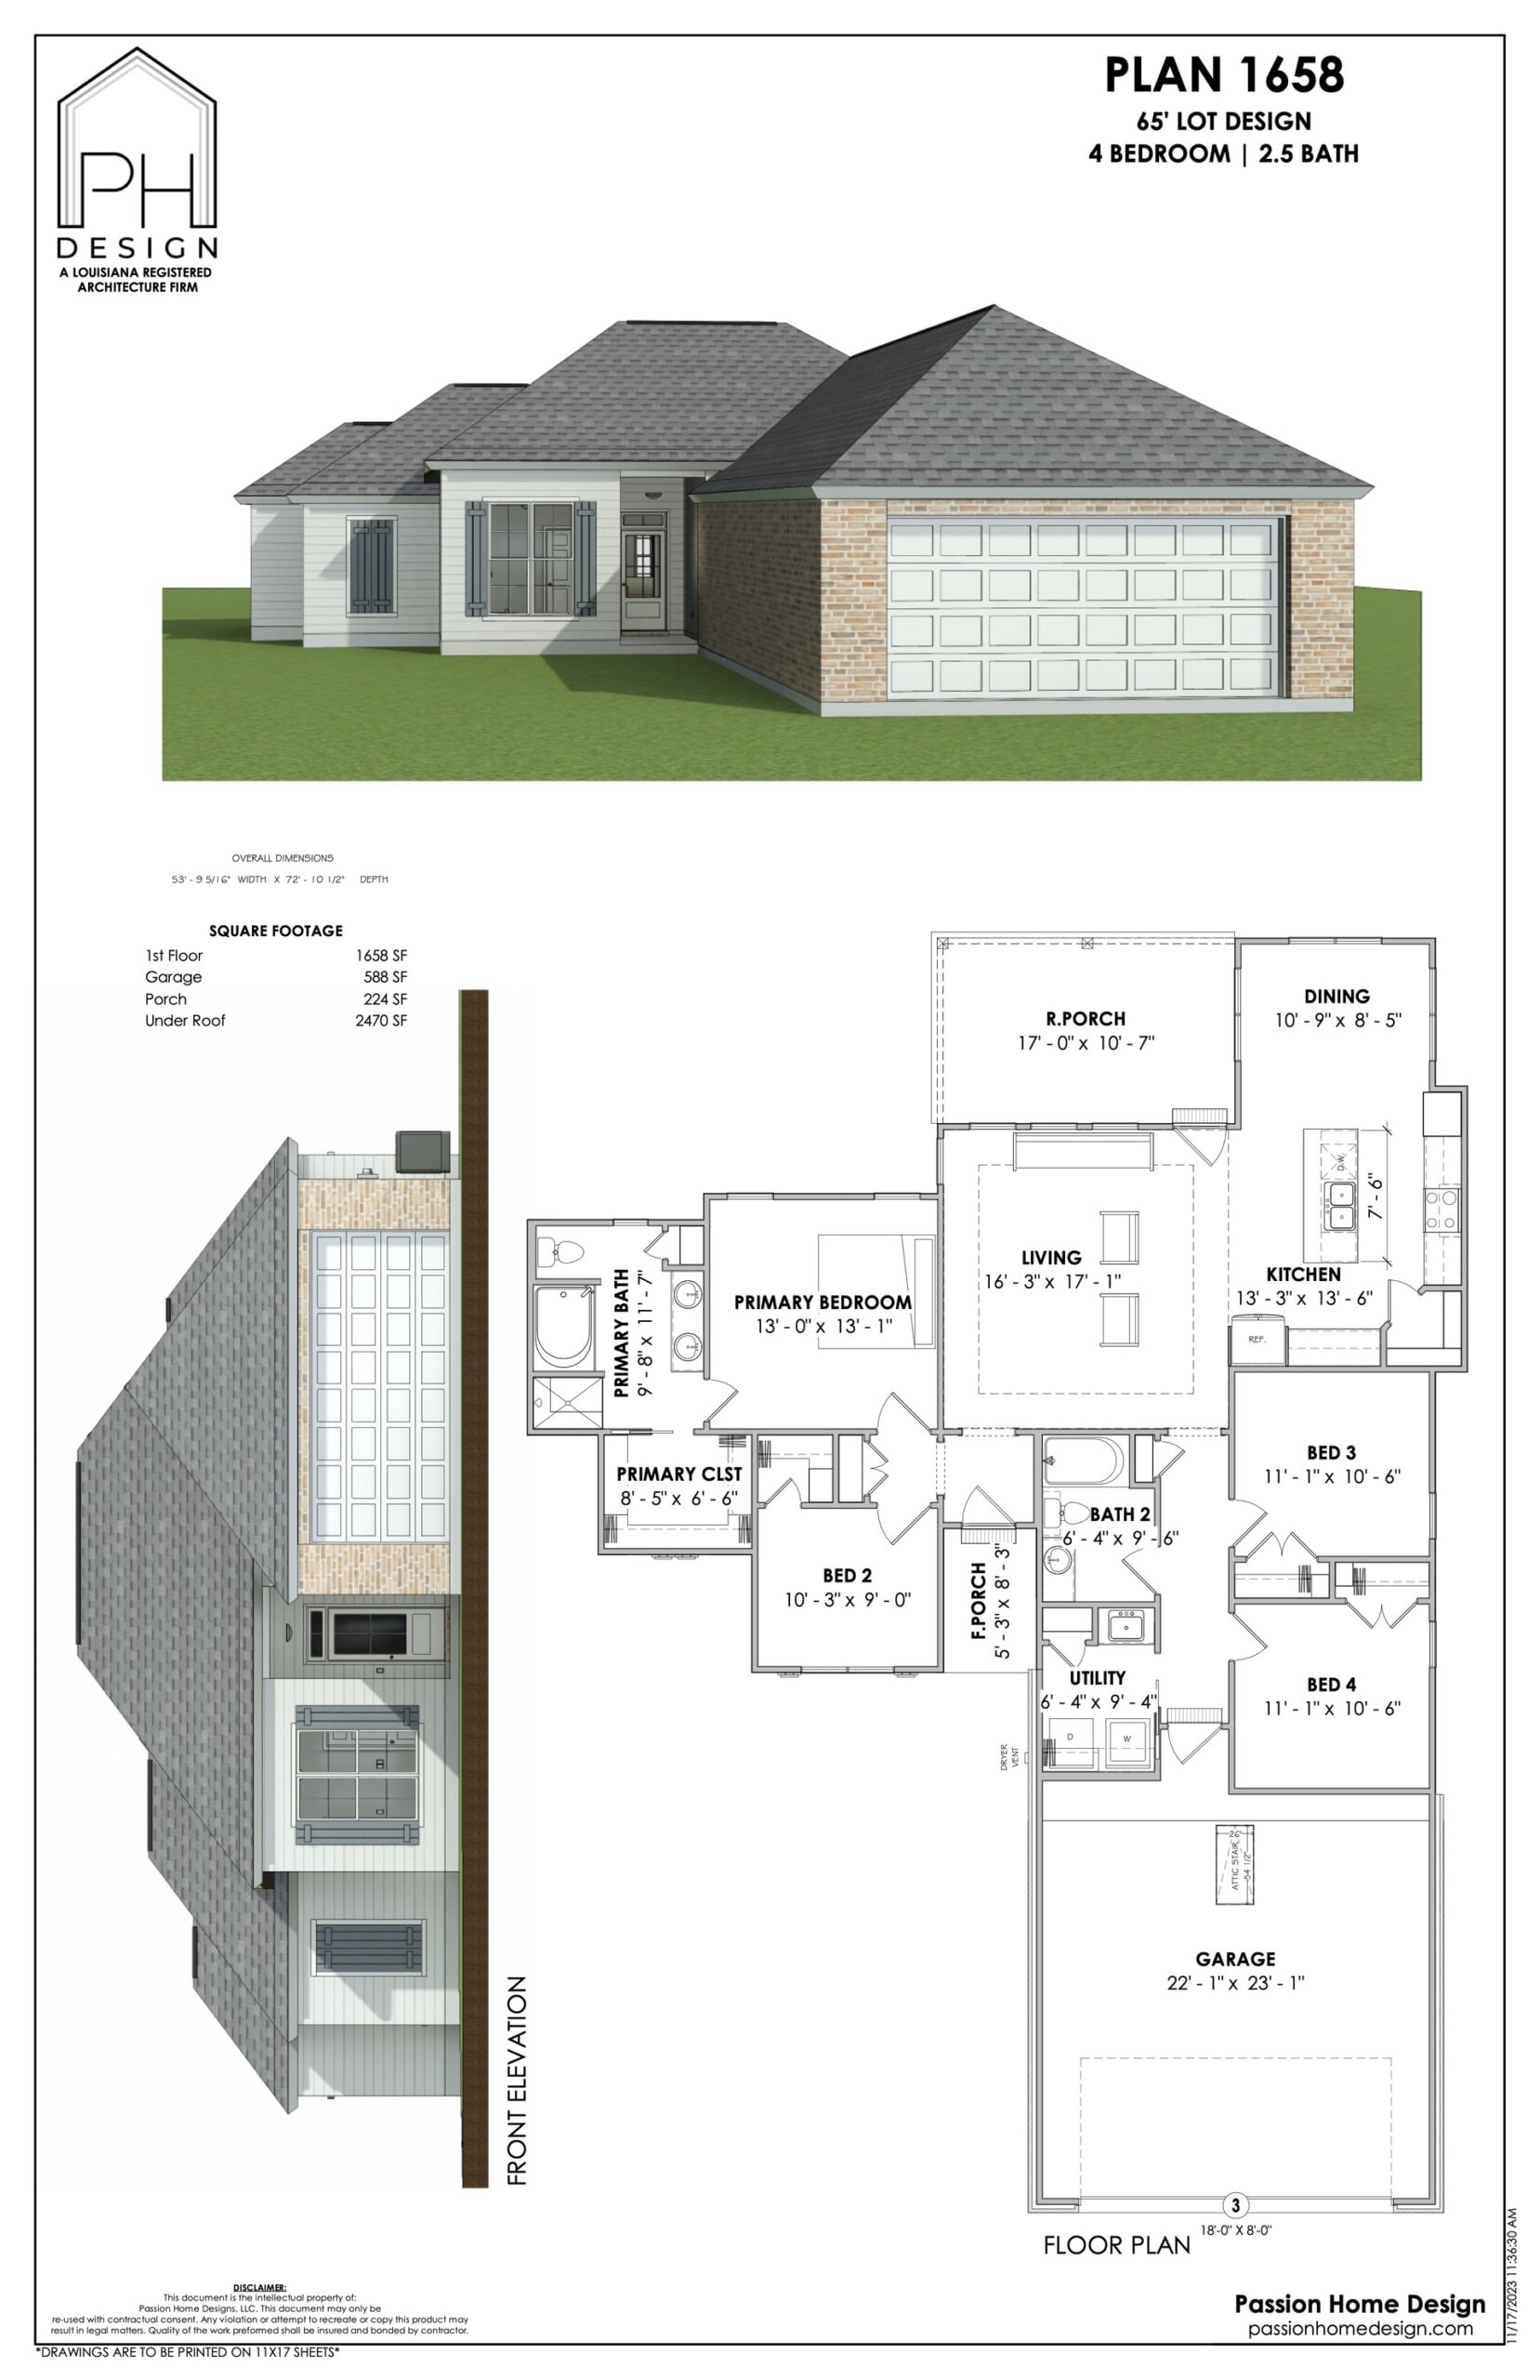 a house plan with a garage and a two car garage.